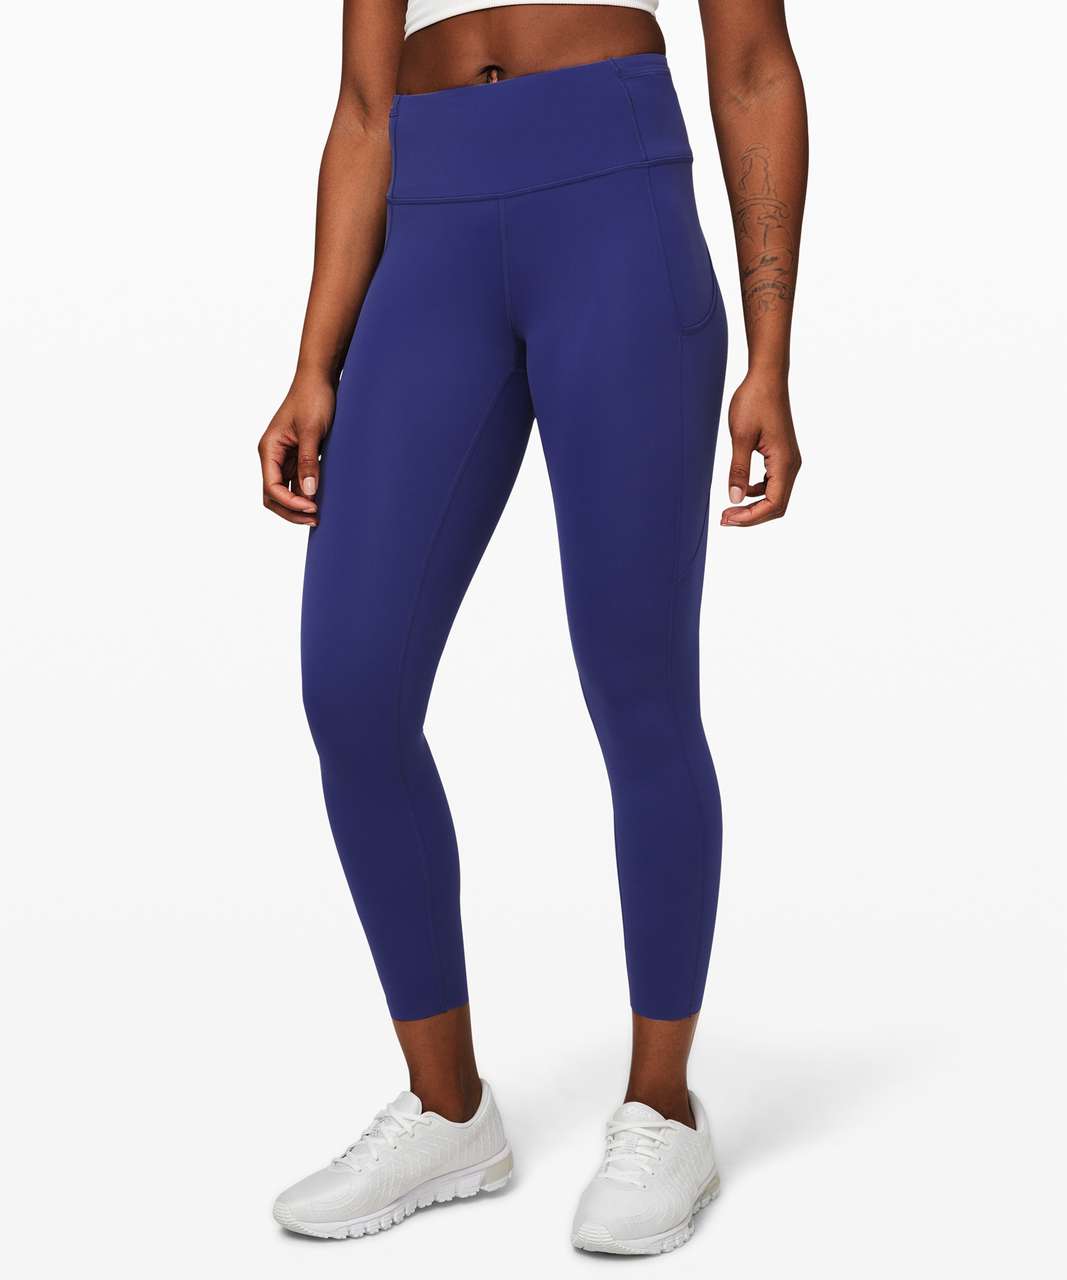 Lululemon Fast and Free Tight II 25" *Non-Reflective Nulux - Larkspur